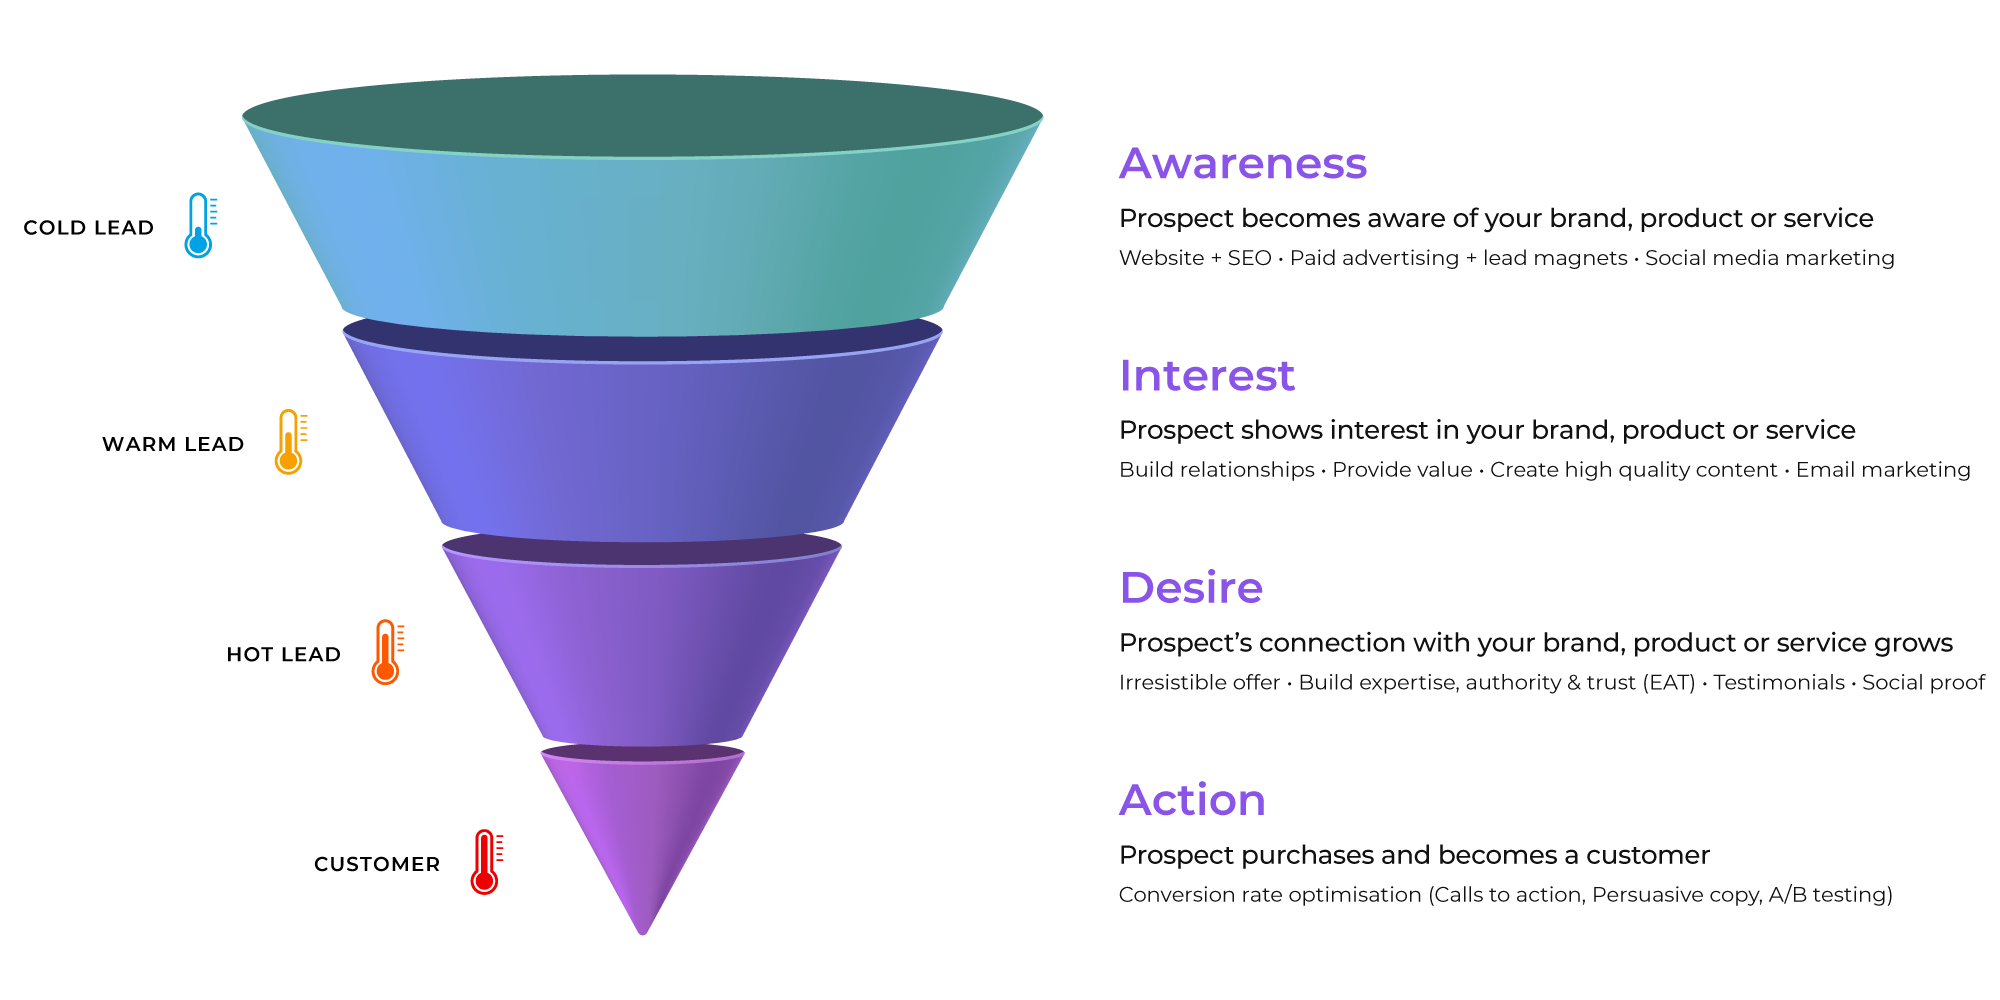 an infographic showing the buyer funnel process our web design agency uses to turn cold leads into paying customers and the 4 stages of the funnel which are awareness, interest, desire and action